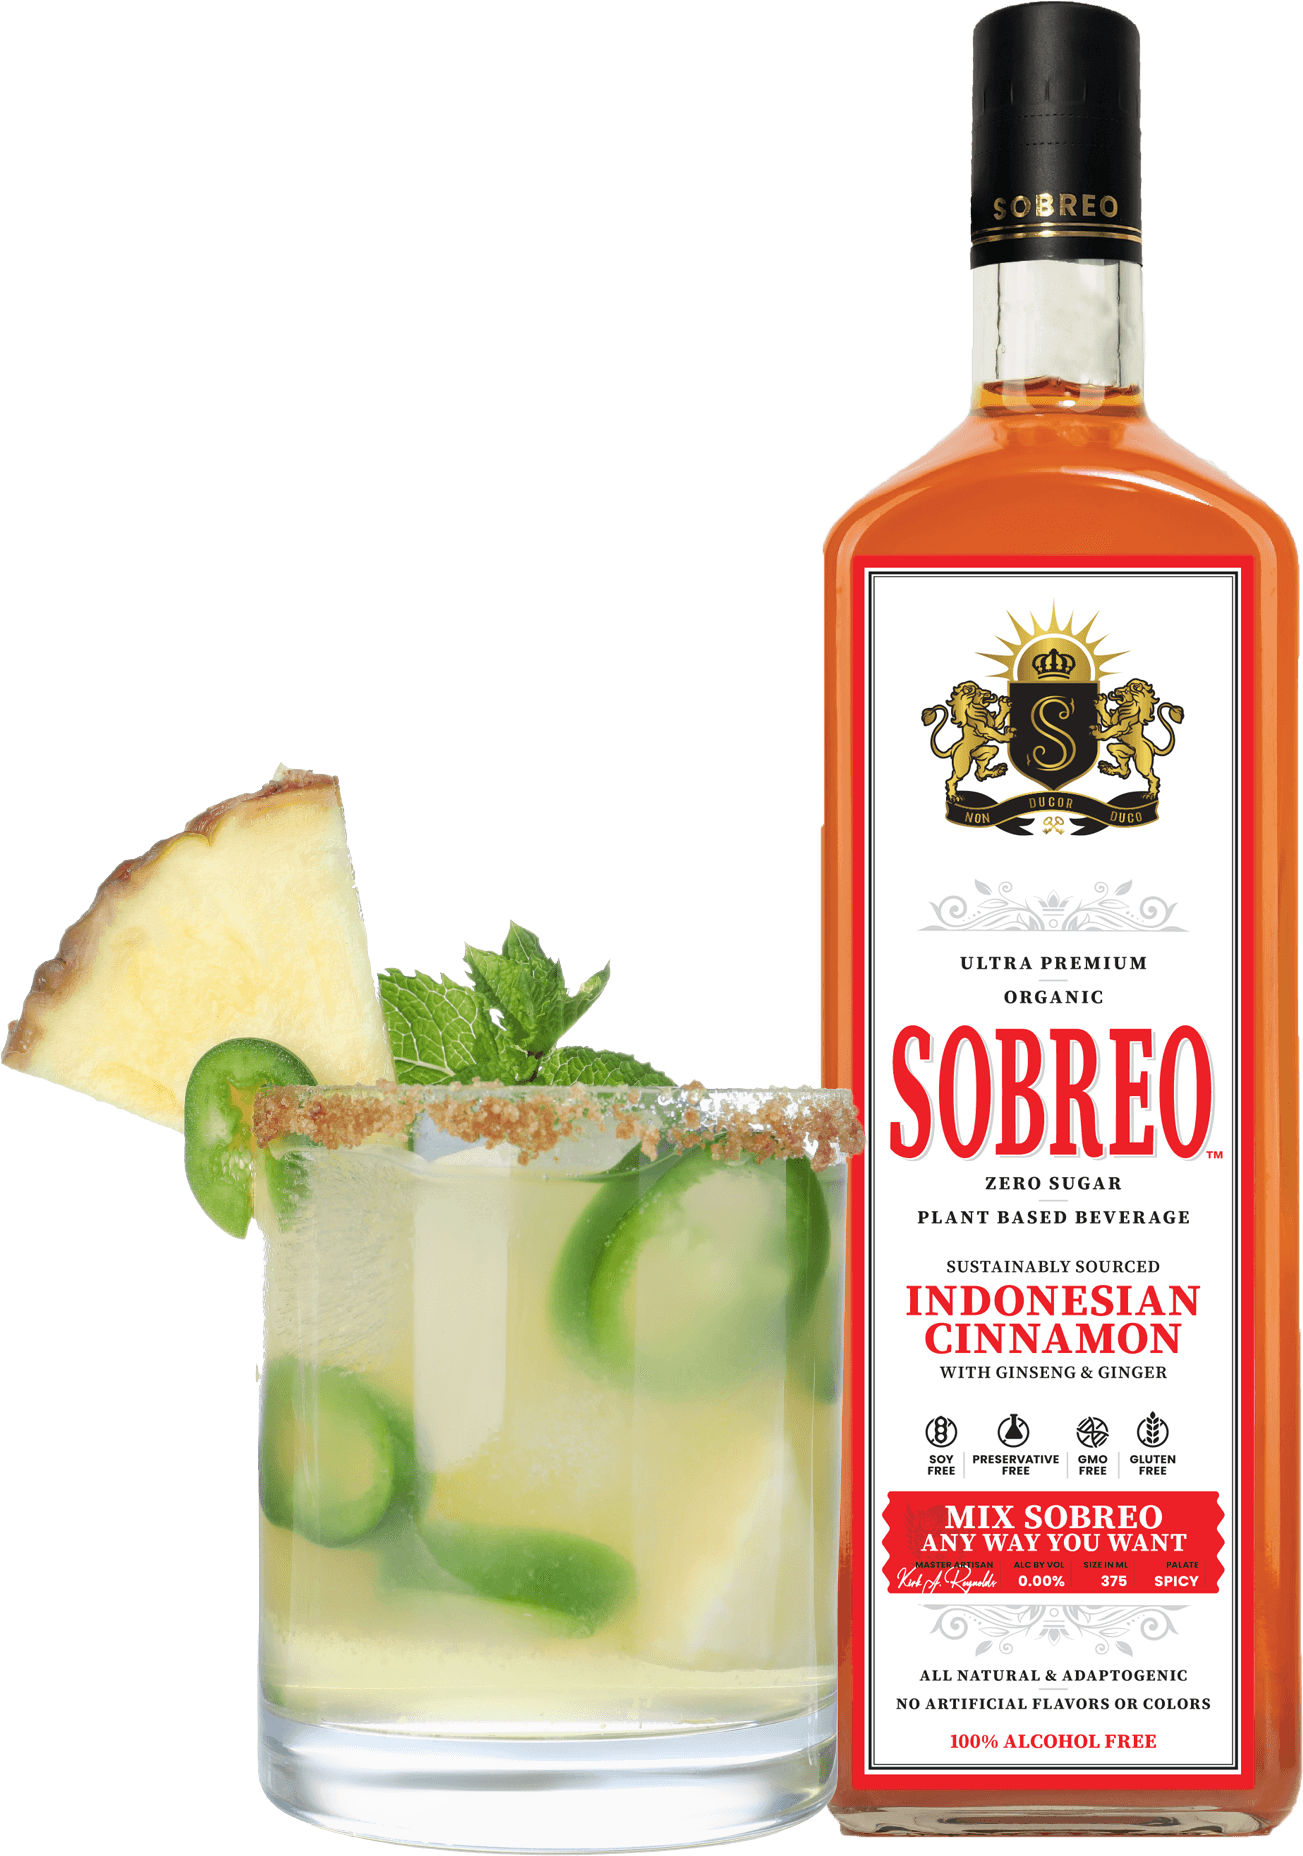 Sobreo non alcoholic cocktail and mocktail mixer in Indonesian Cinnamon spicy flavor perfect to infuse into a Manhattan cocktail recipe